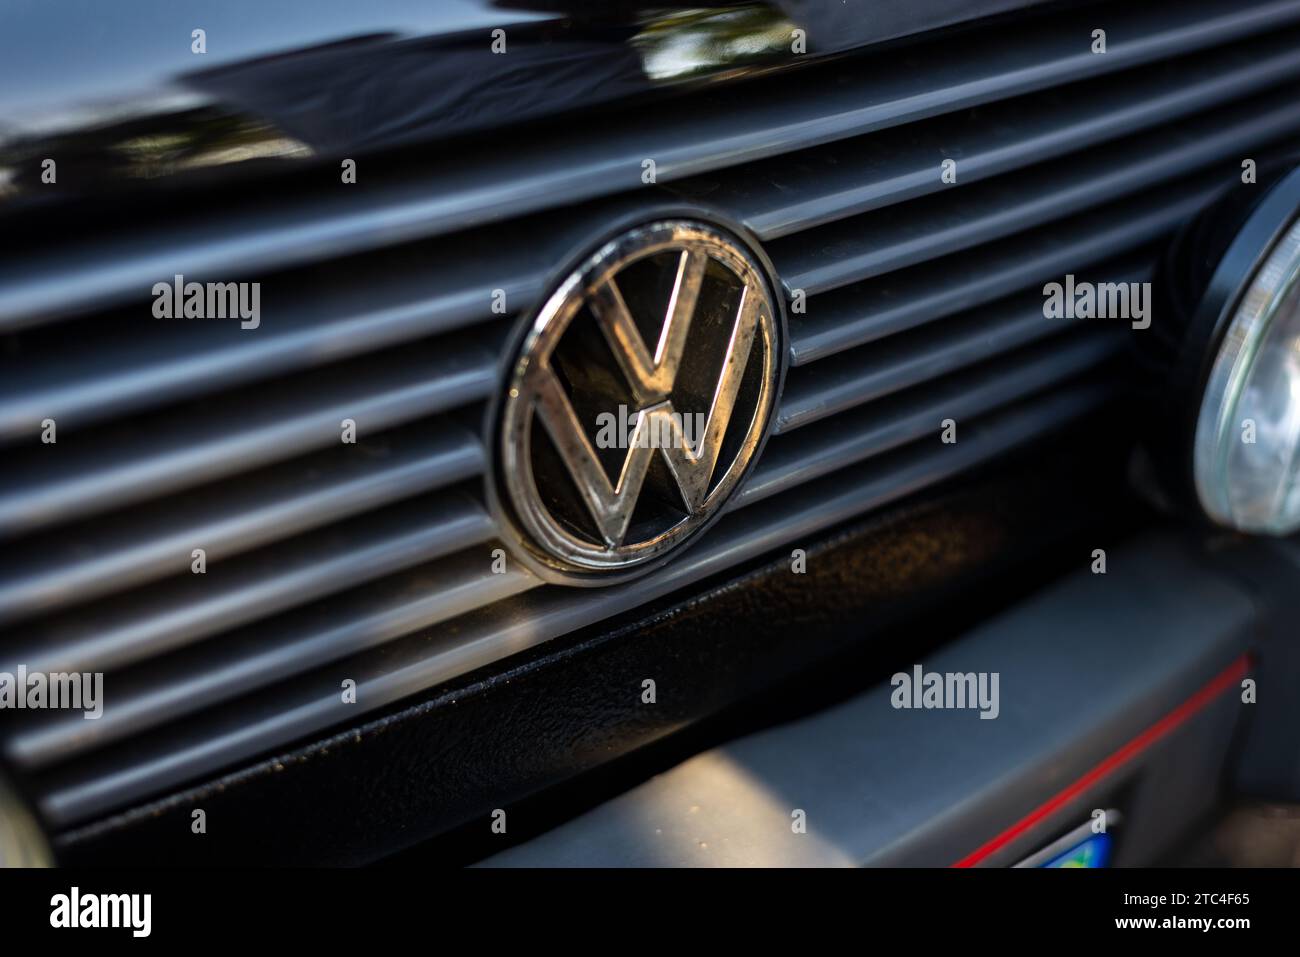 Salvador, Bahia, Brazil - December 02, 2023: Detail of the Volkswagen symbol on a vintage car on display in the city of Salvador, Bahia. Stock Photo